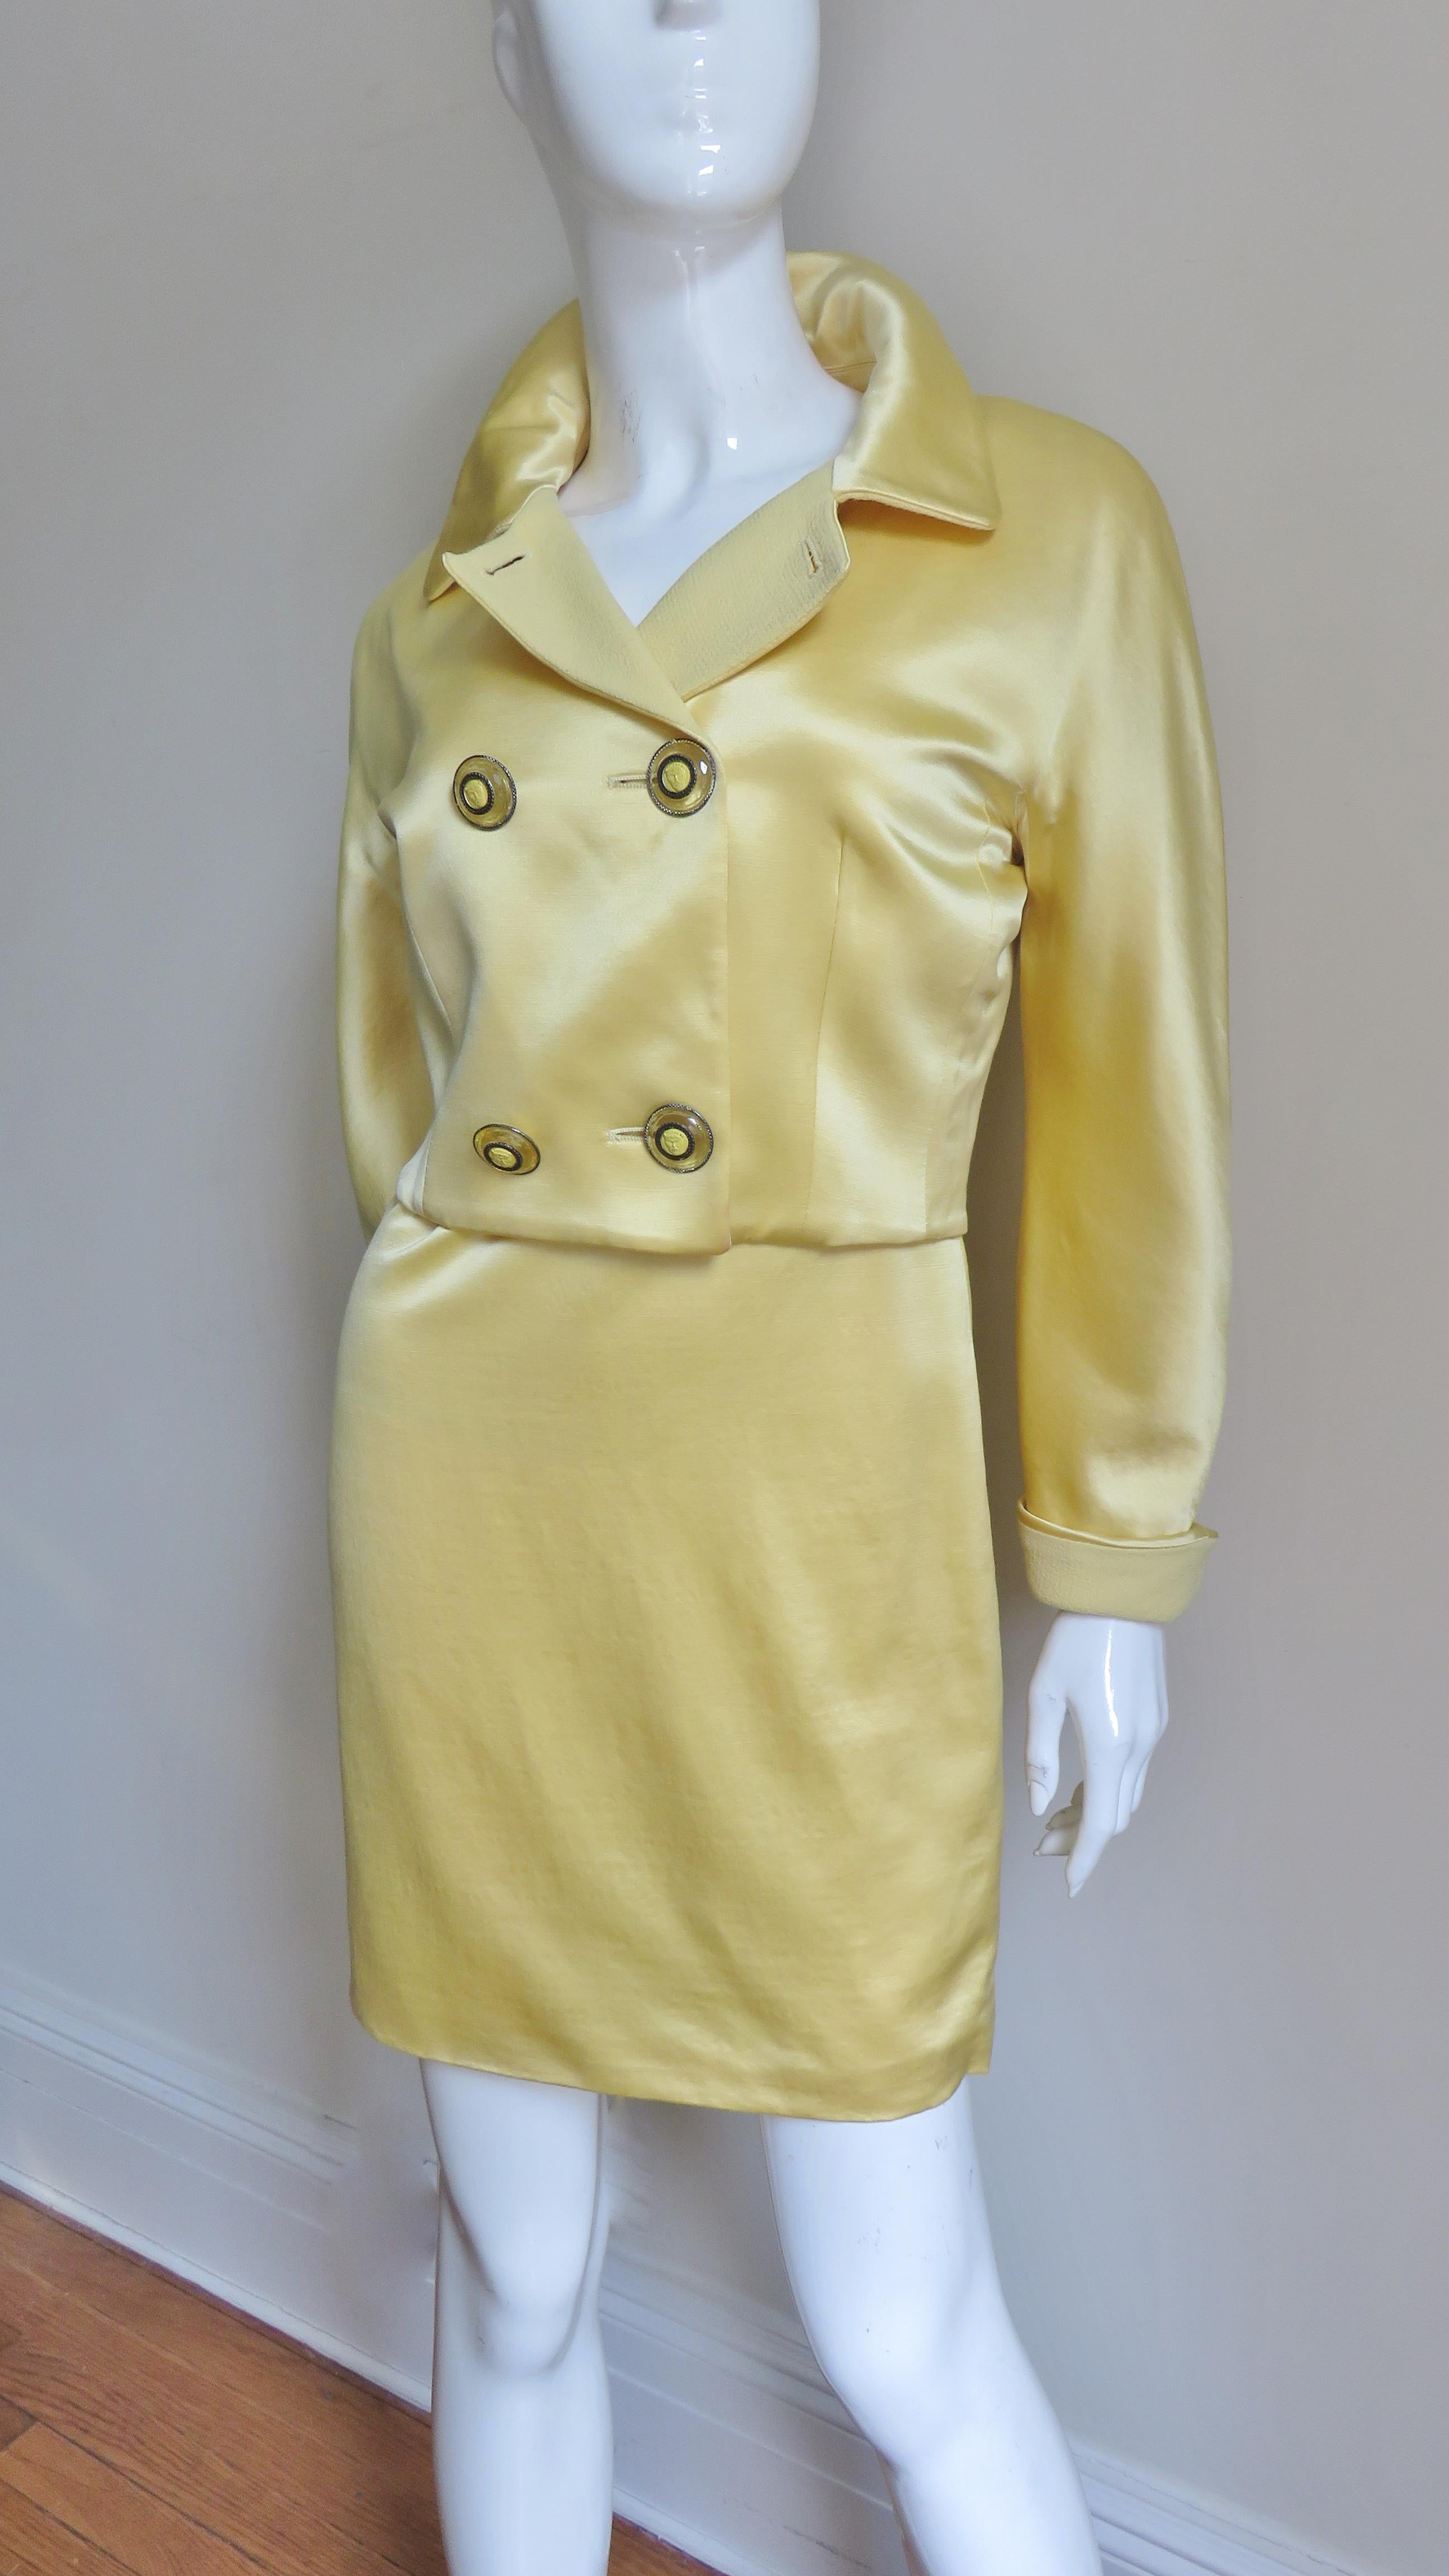 A beautiful yellow silk dress and jacket set from Gianni Versace's Istante collection. The sleeveless scoop neck semi fitted dress is simply cut with a matching yellow light weight wool upper bodice and matching yellow silk skirt potion. It is fully